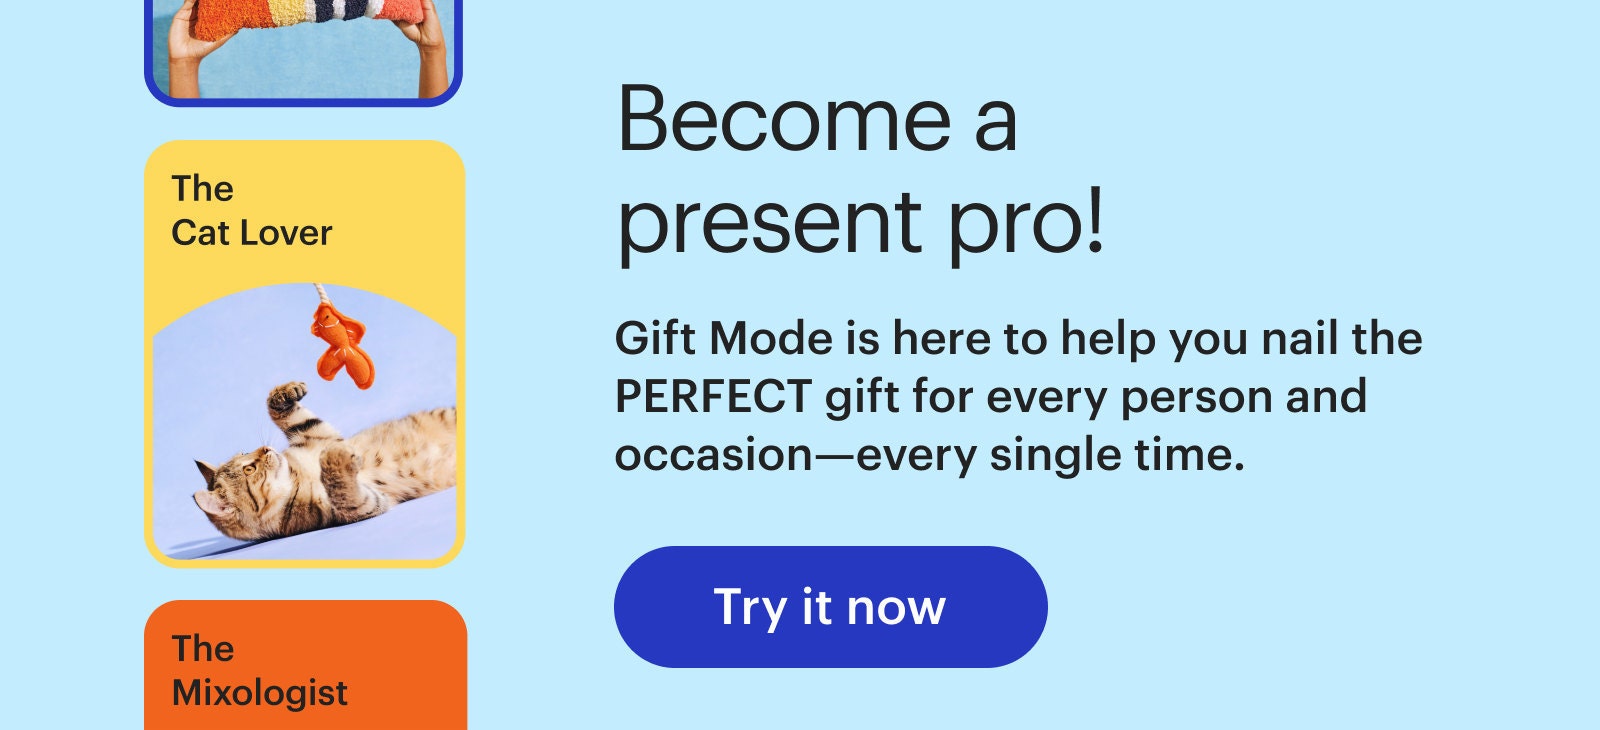 A banner promoting Gift Mode on Etsy.